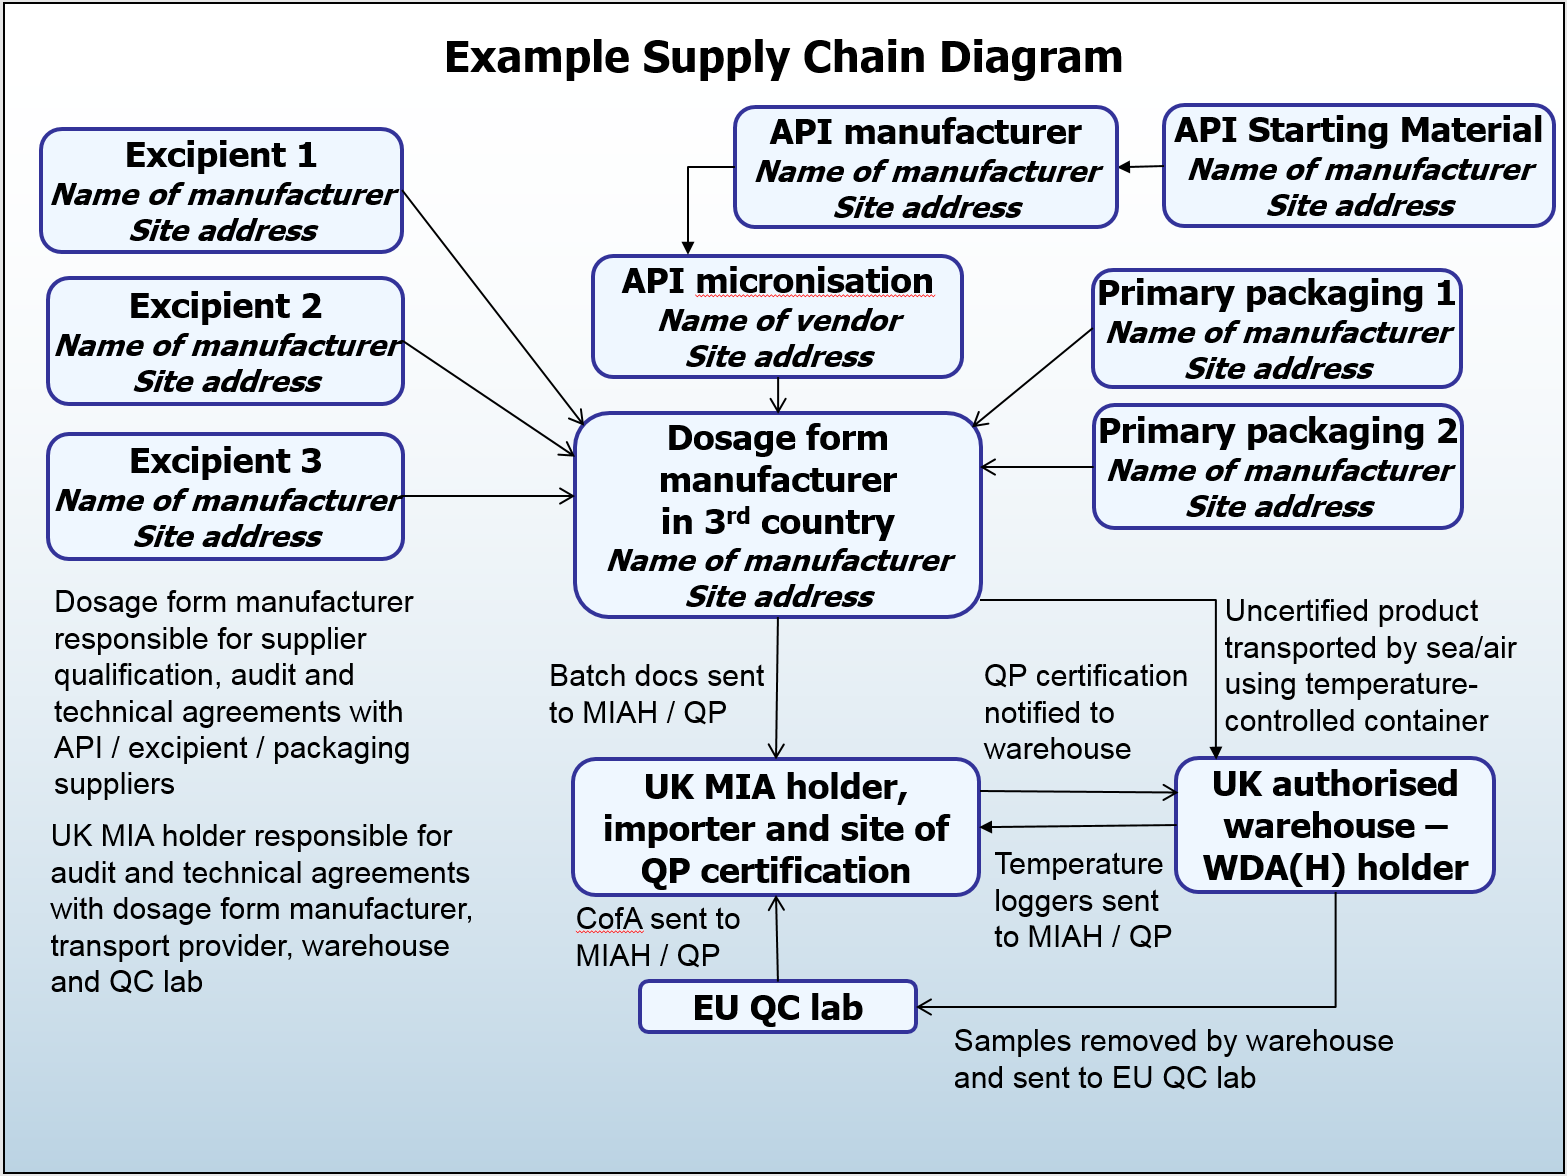 Diagram illustrating the supply chain.  Dosage form manufacturer responsible for supplier qualification, audit and technical agreements with API /excipient/packaging suppliers.  UK MIA holder responsible for audit and technical agreements with dosage form manufacturer, transport provider, warehouse and QC lab.  